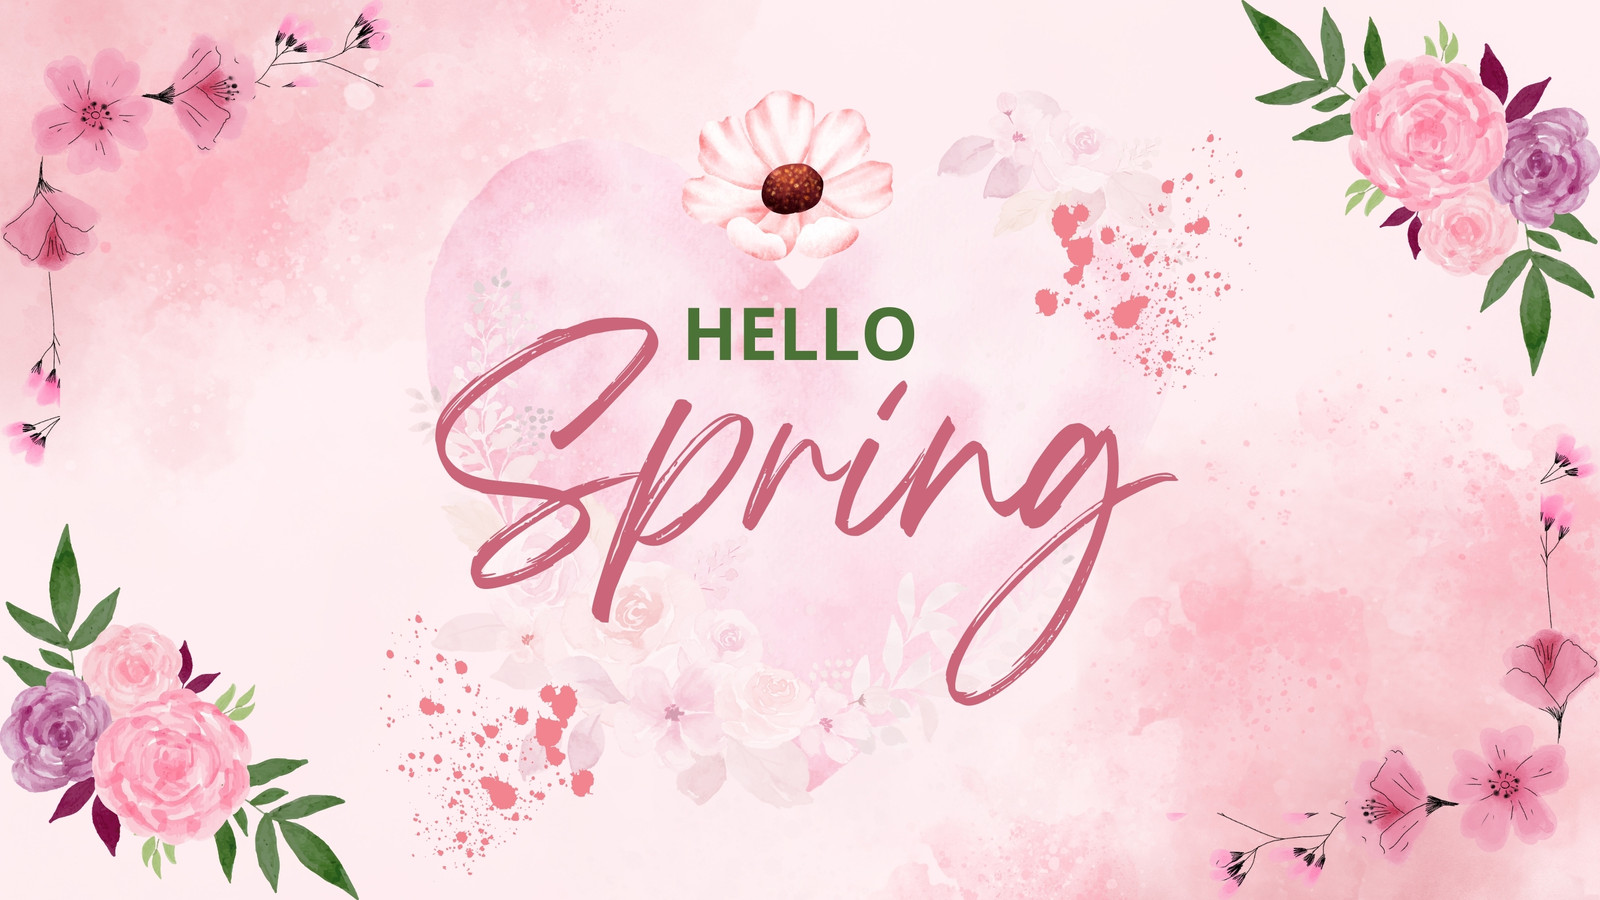 Page 4 - Free and customizable spring desktop wallpaper templates